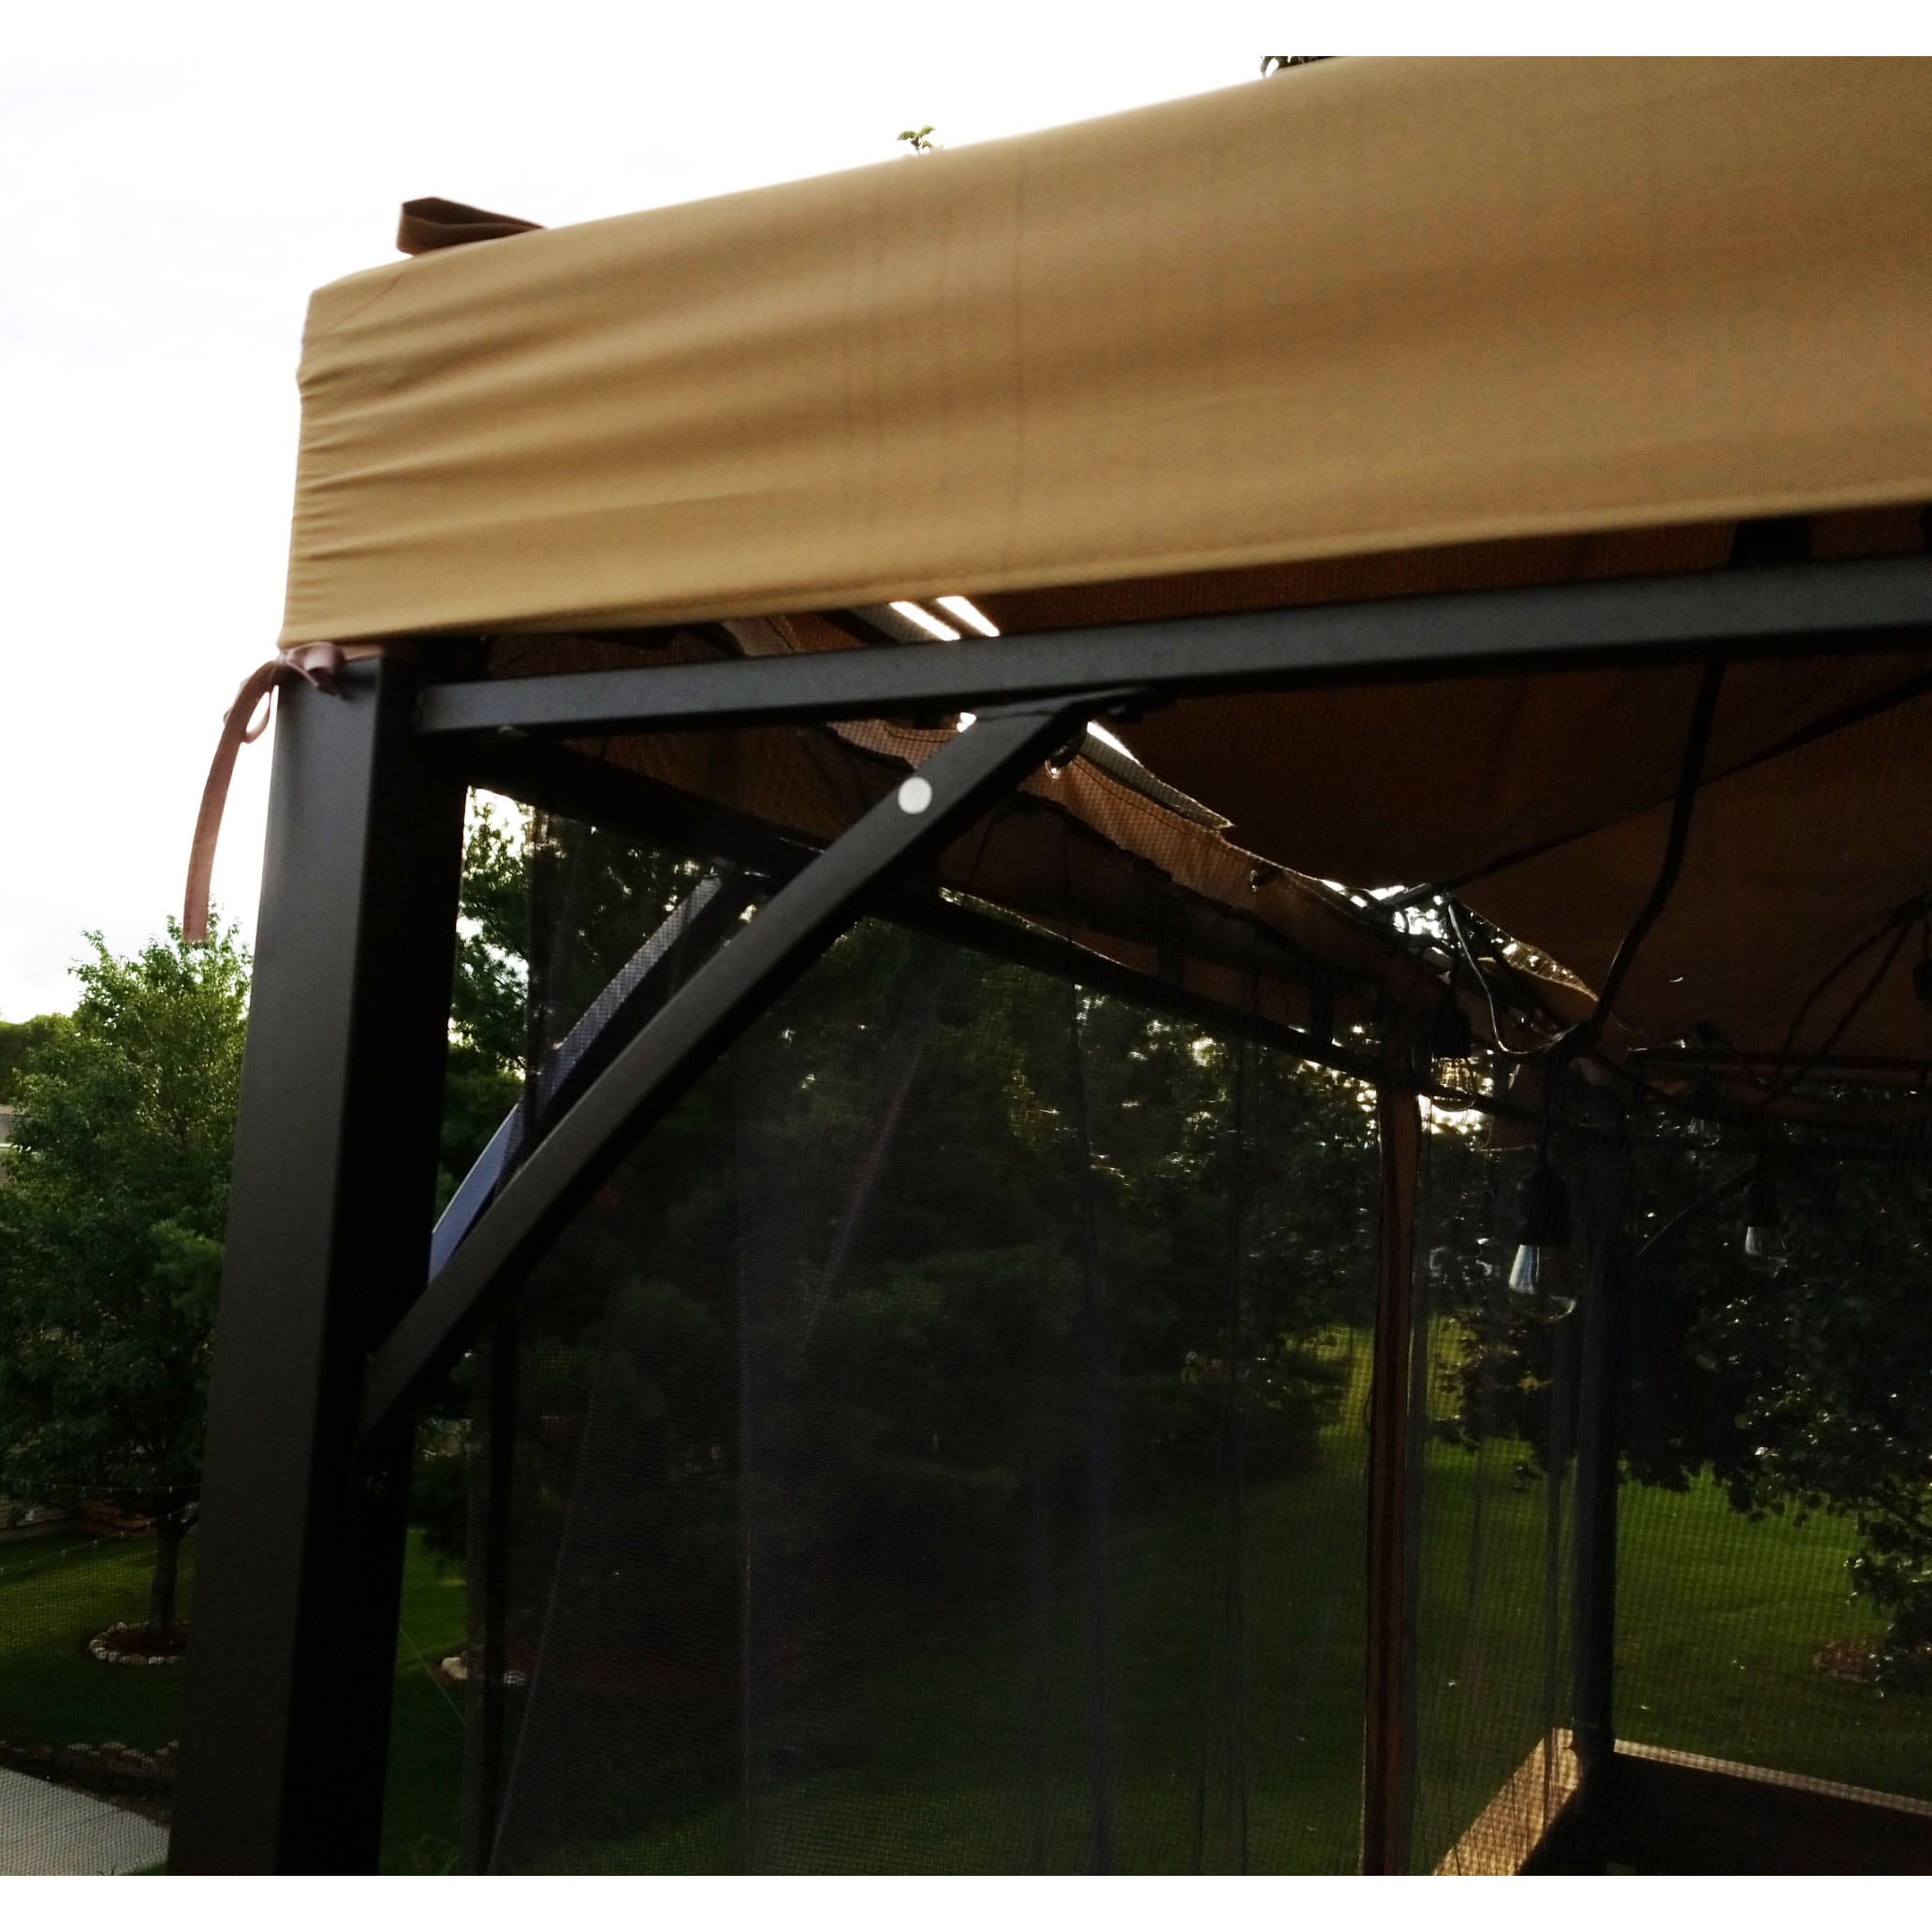 Standard 350 Garden Winds Replacement Canopy Top Cover for The Aldi Leaf Gazebo